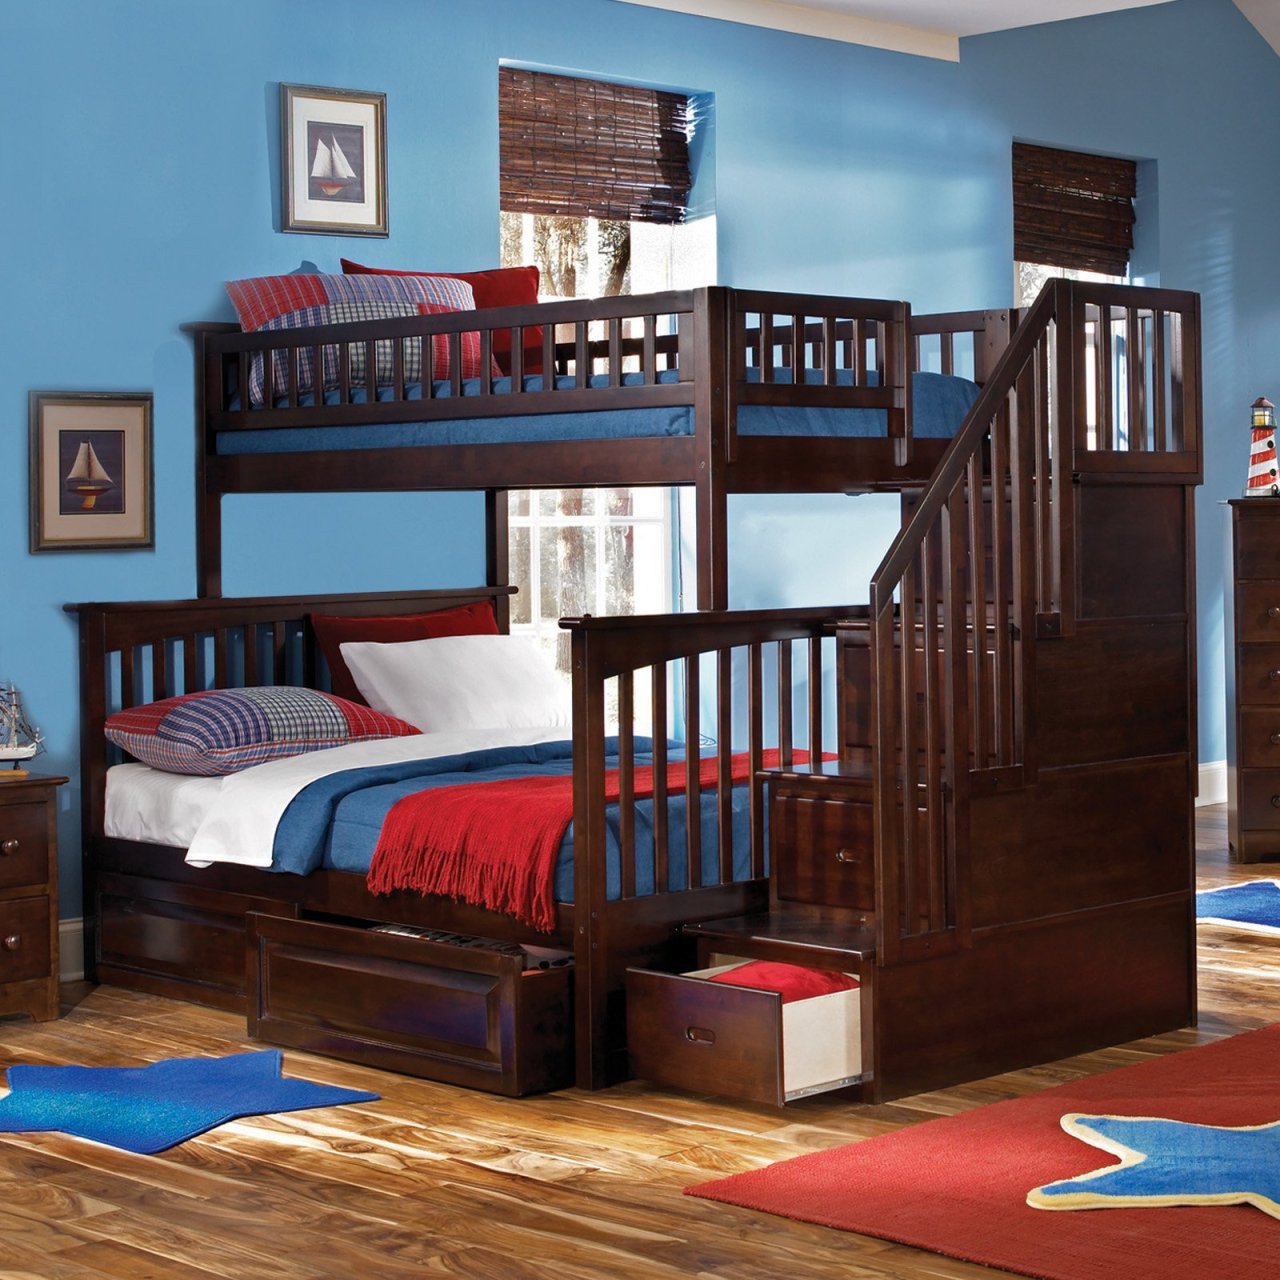 Cool Awesome room bedroom bed loft dream room bunk beds bunkbed ...